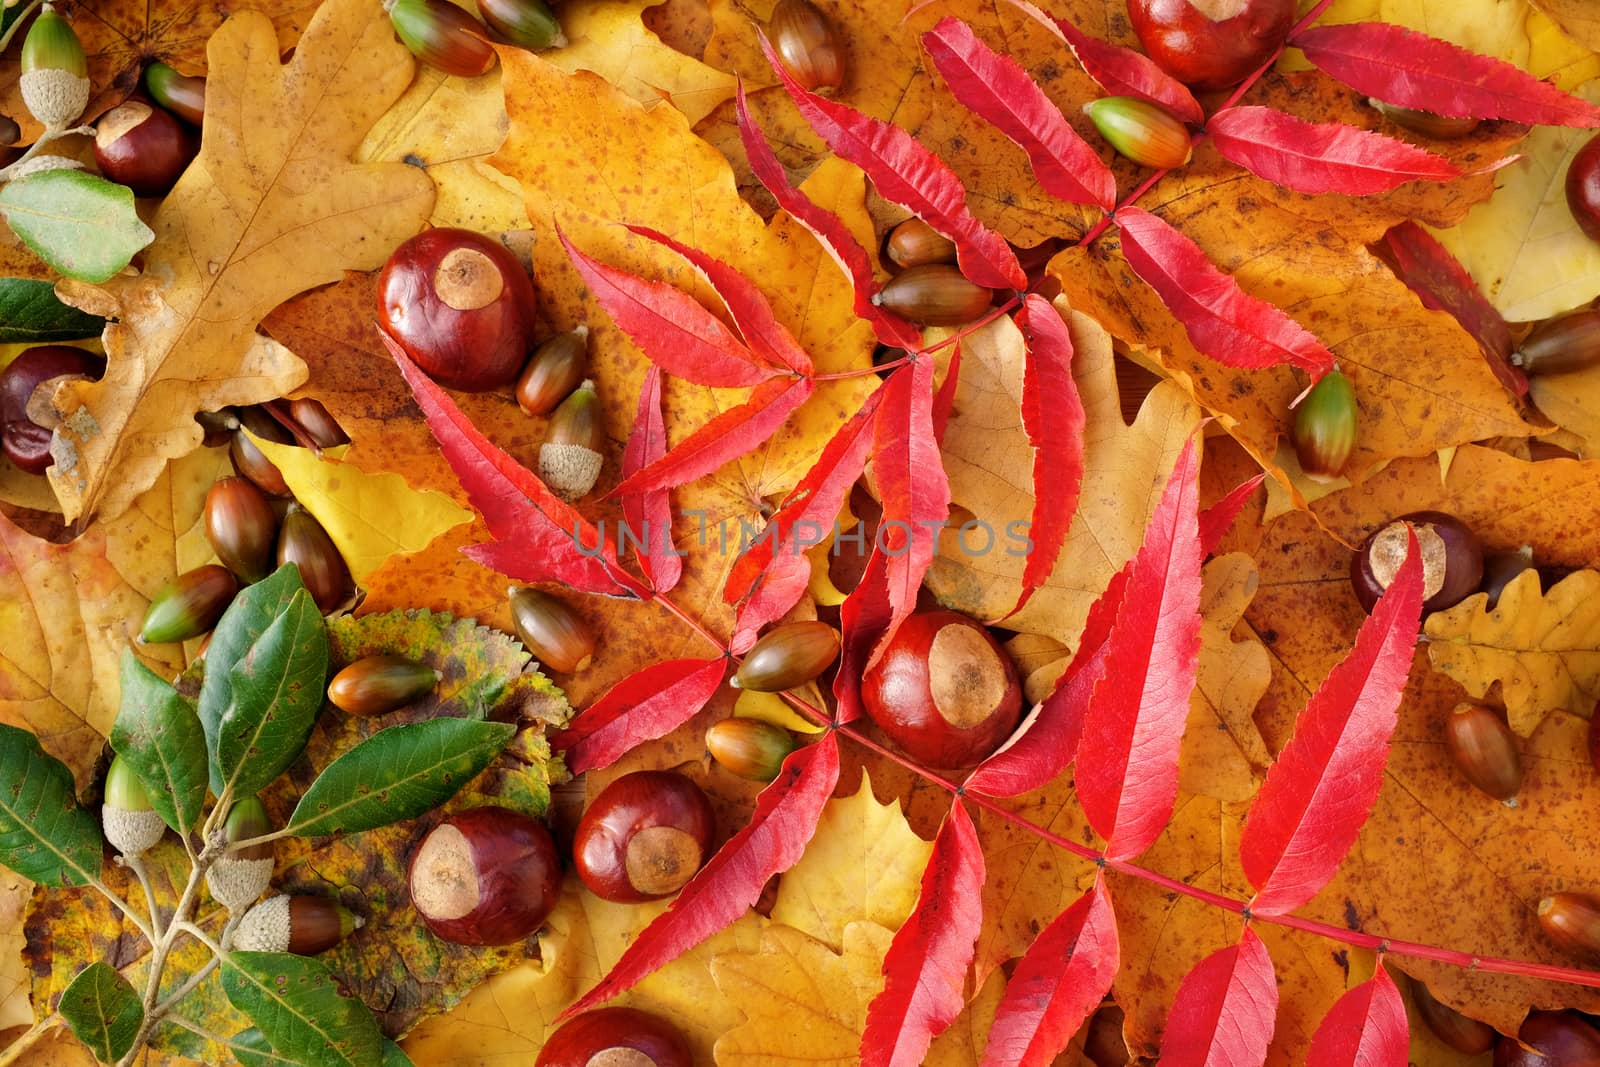 Bright red and yellow autumn leaves, shiny conkers and evergreen oak foliage and acorns as an abstract background texture